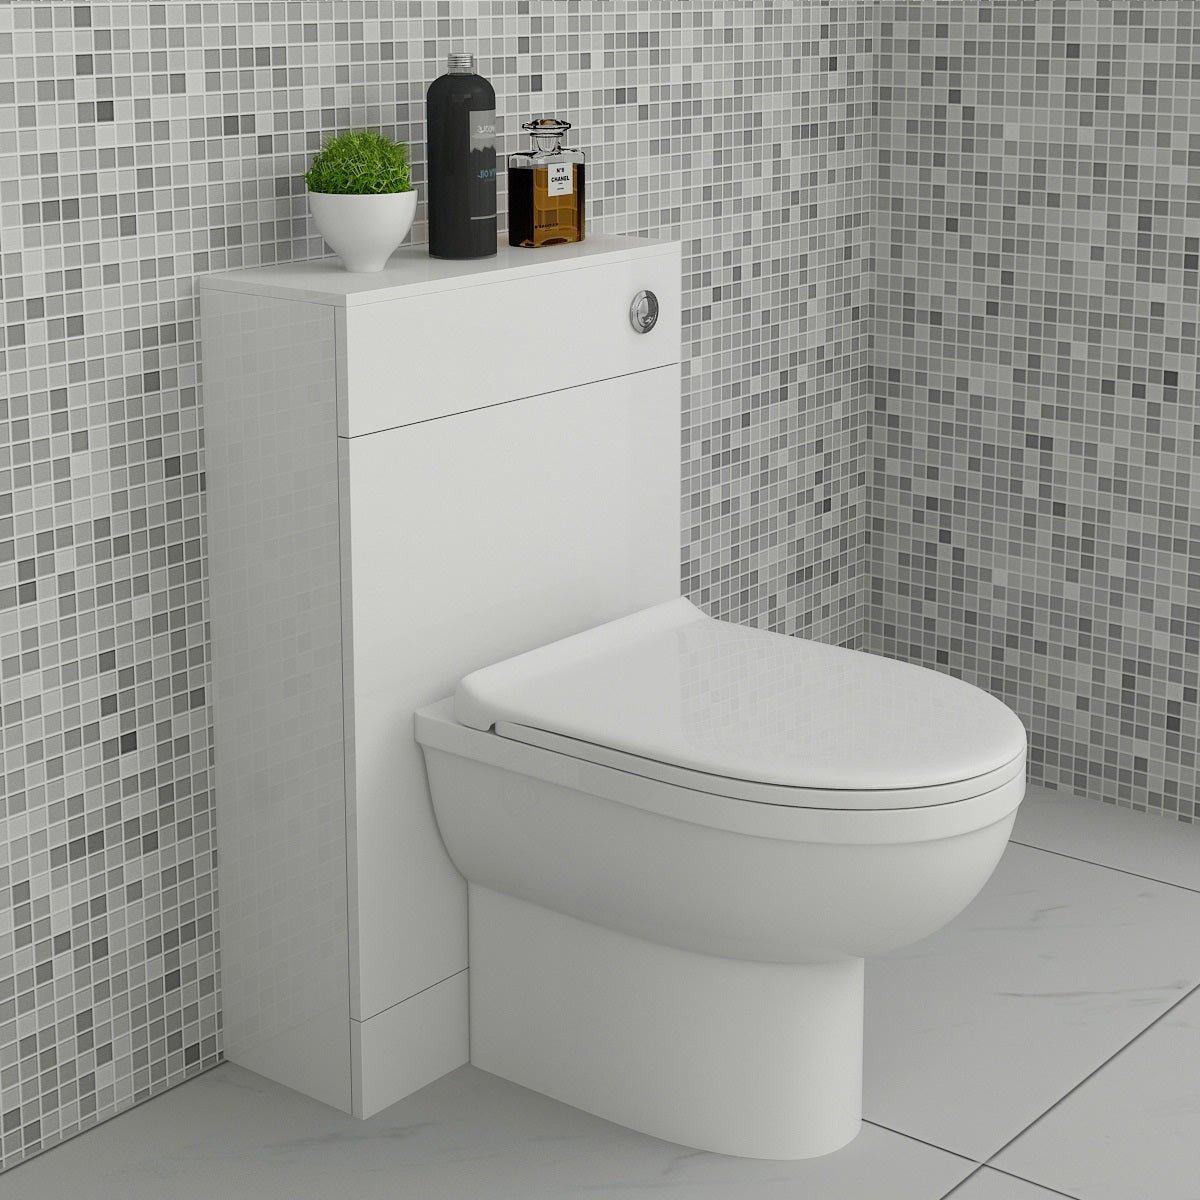 Venus WC Unit in White - Stylish and Modern Bathroom Storage Solution, Ideal for Contemporary UK Homes. Sleek Design, Space-Saving, High-Quality Finish. Available at Bathroom4Less.co.uk.